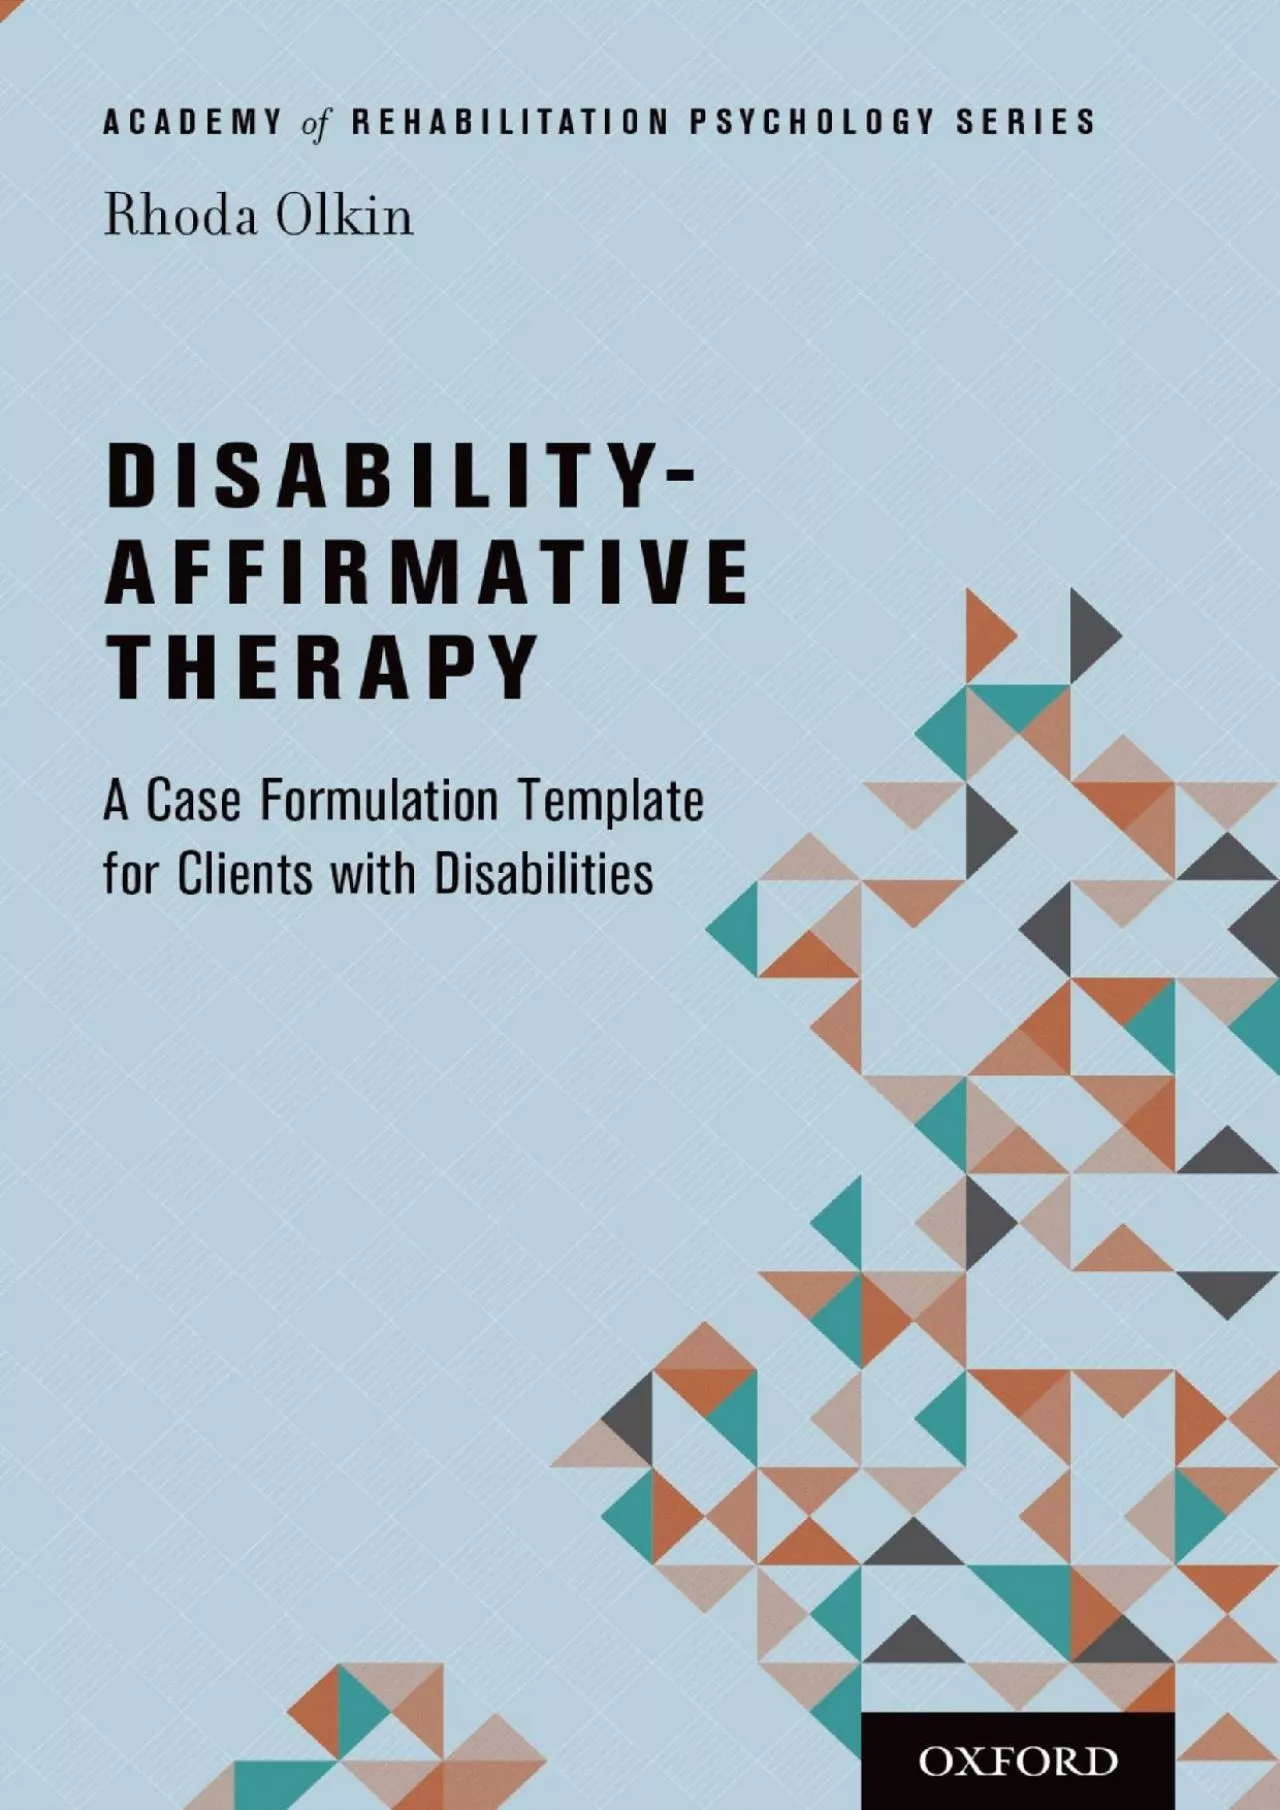 (BOOK)-Disability-Affirmative Therapy: A Case Formulation Template for Clients with Disabilities